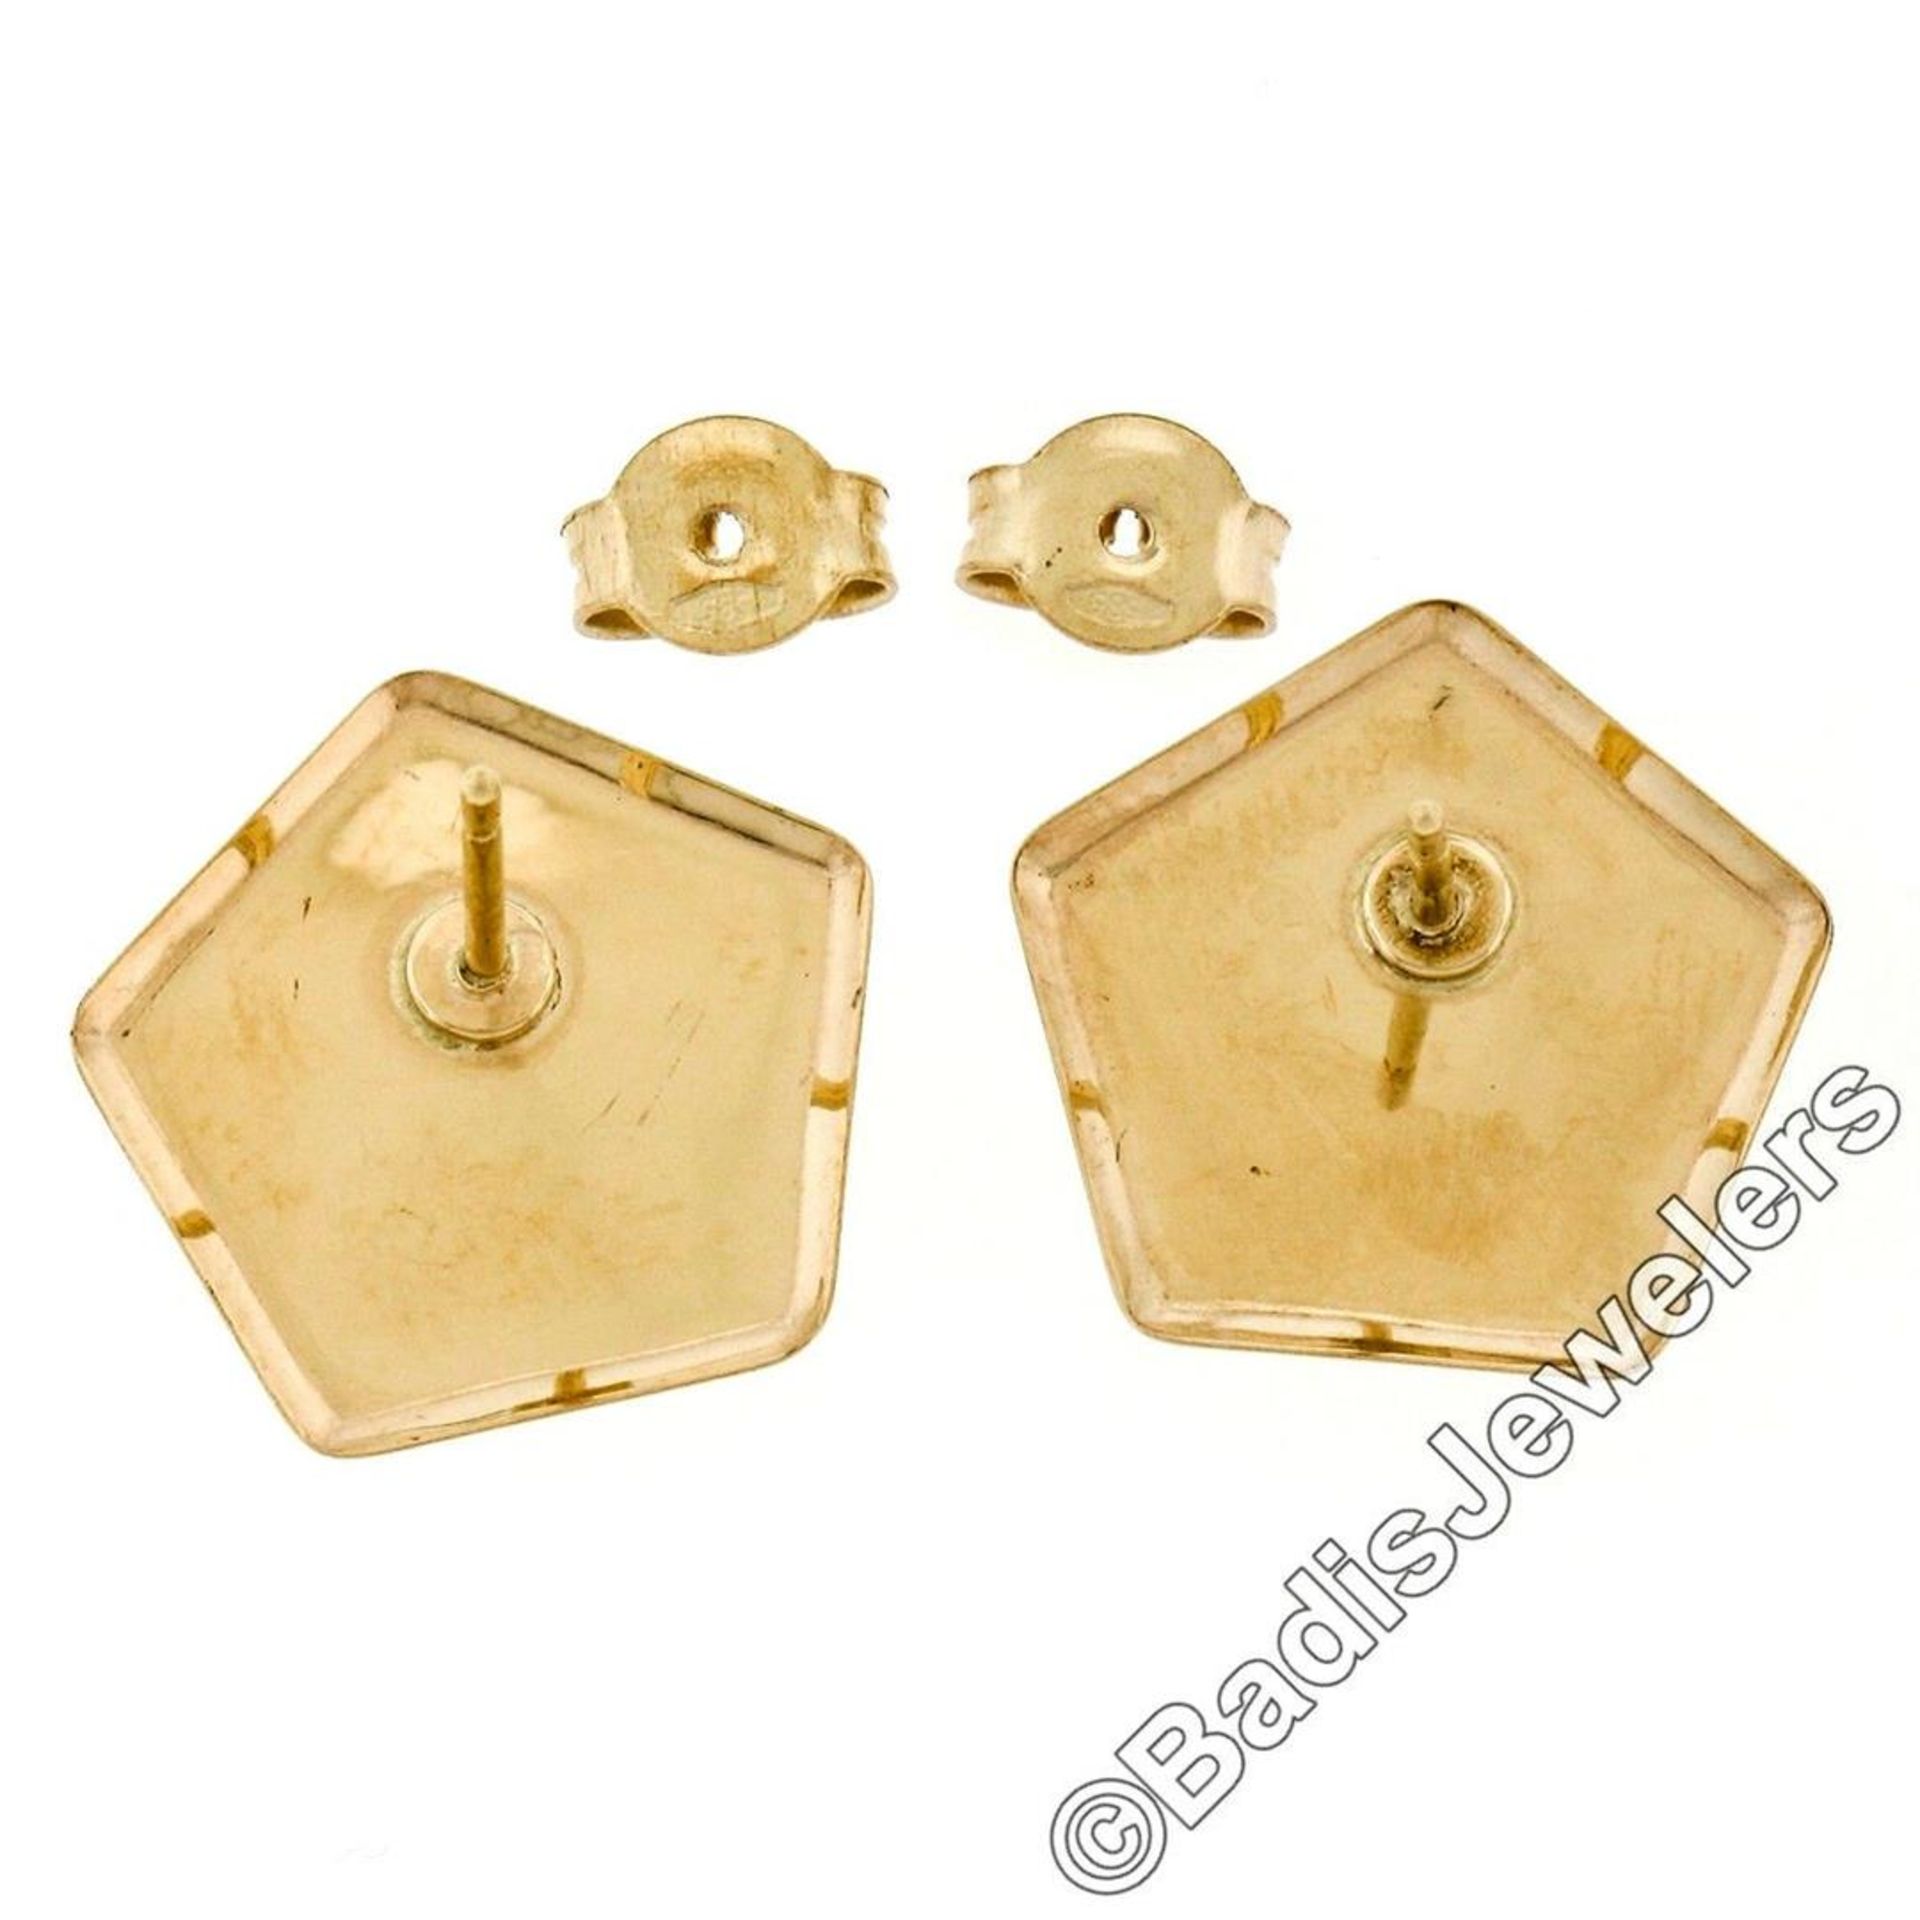 New 14kt Rose, White, and Yellow Gold Stone Finished Tiered Pentagon Stud Earrin - Image 6 of 6